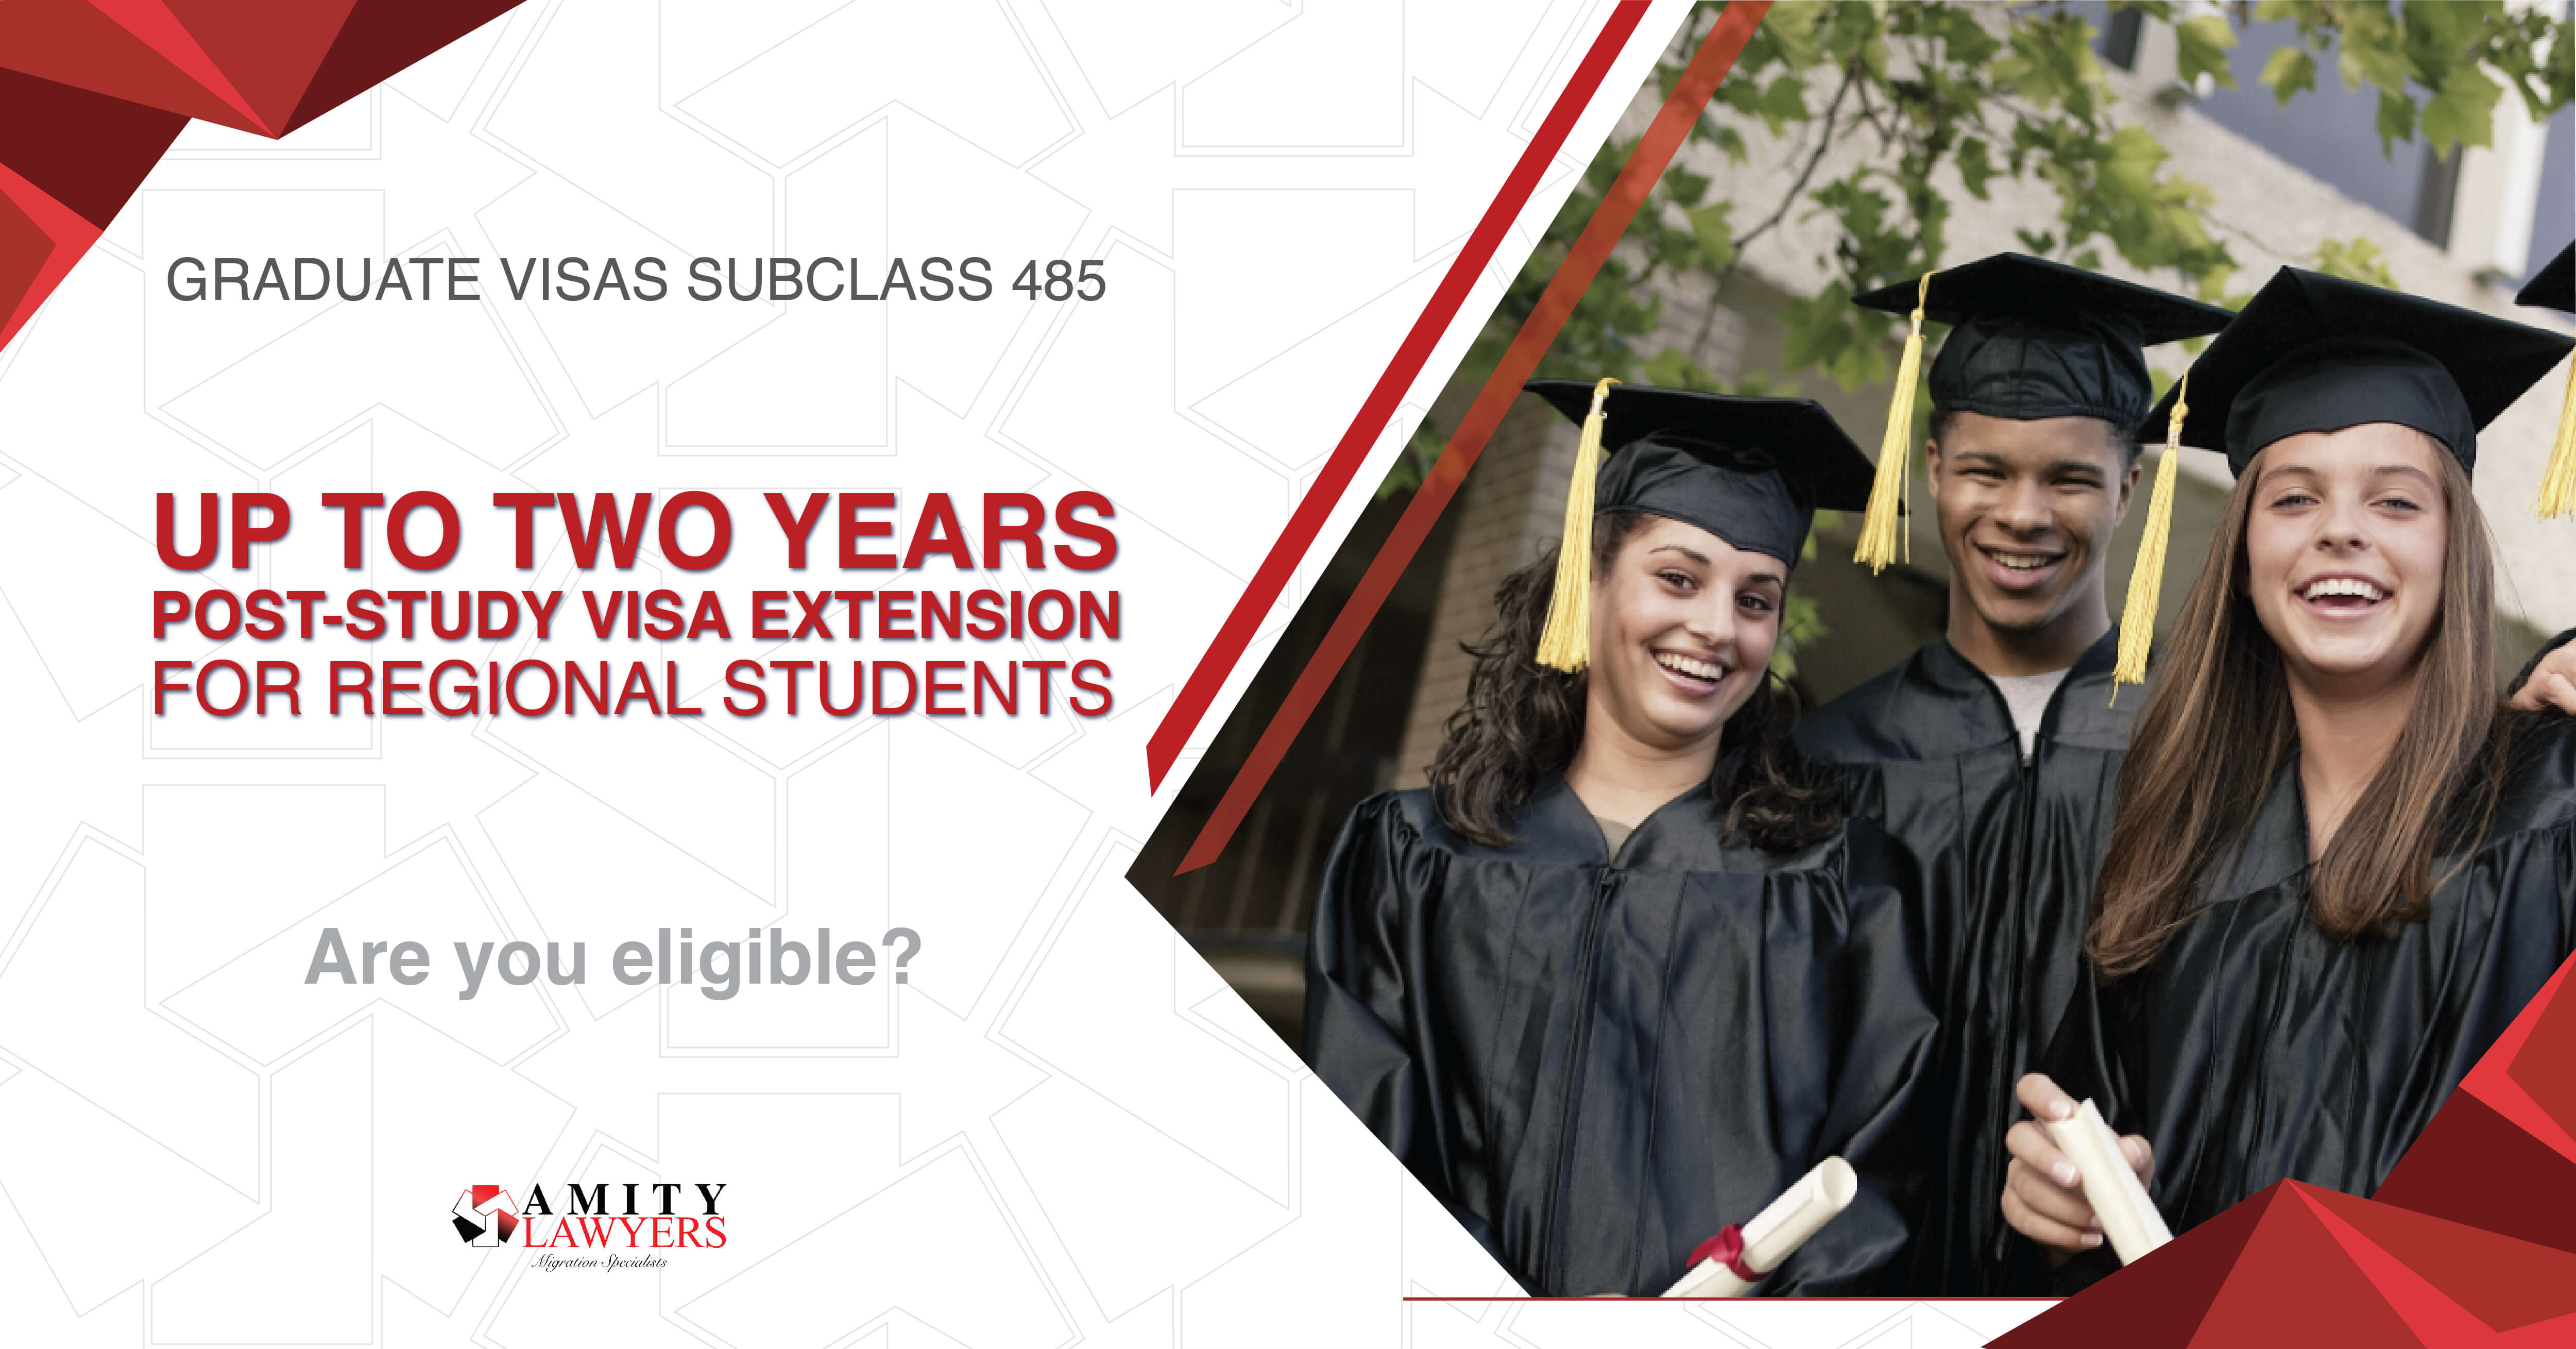 Temporary graduate visas (subclass 485): up to two years post-study visa extension for regional students